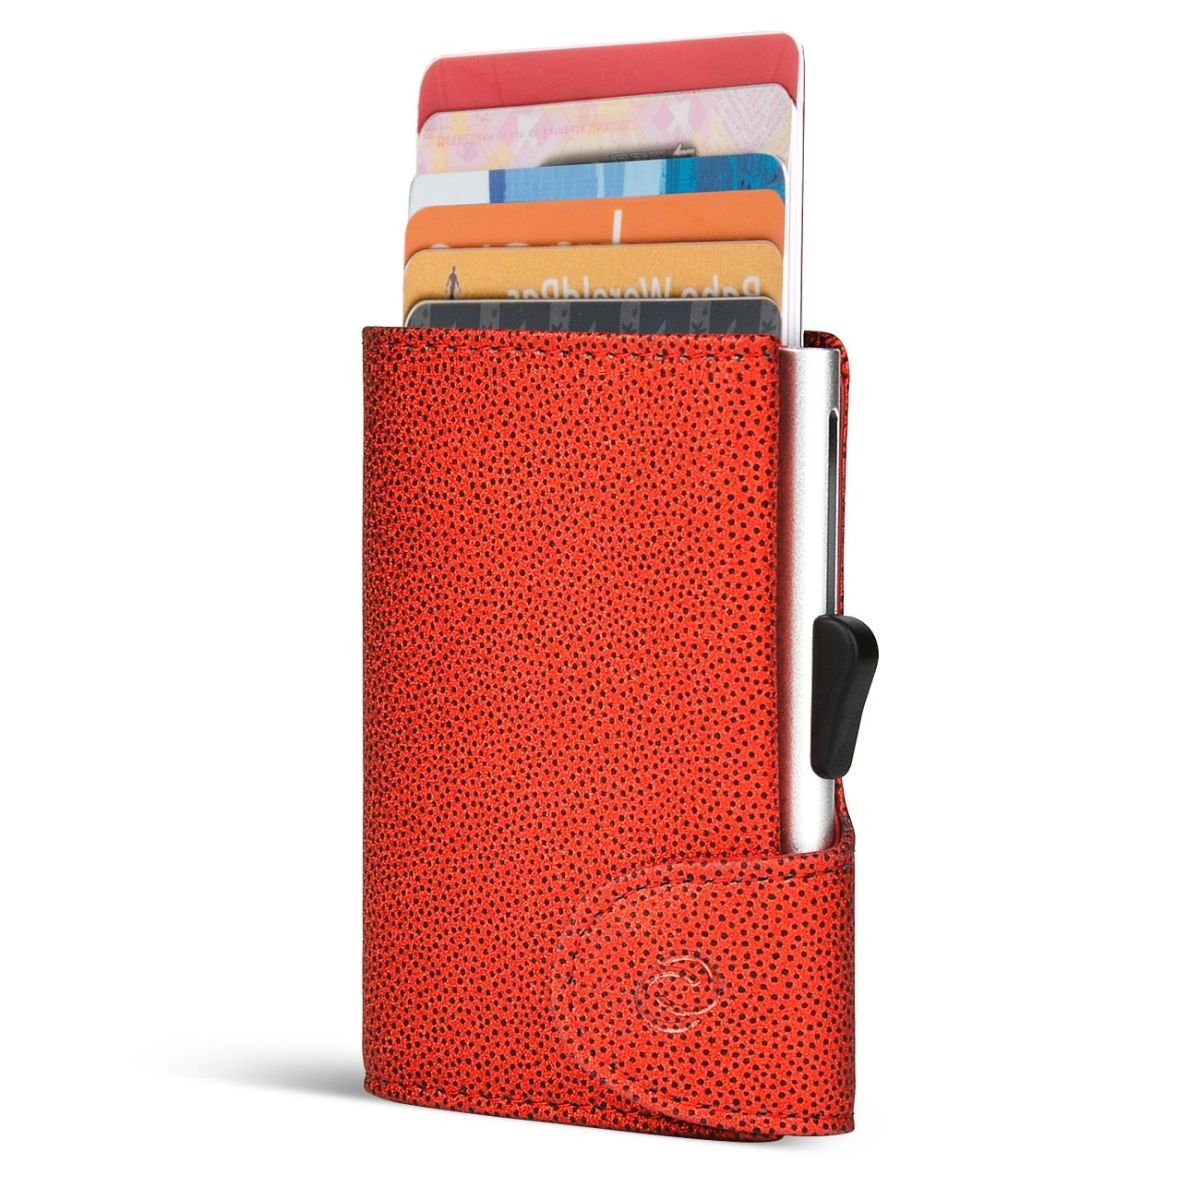 C-Secure Aluminum Card Holder with Genuine Leather - Fashion Red